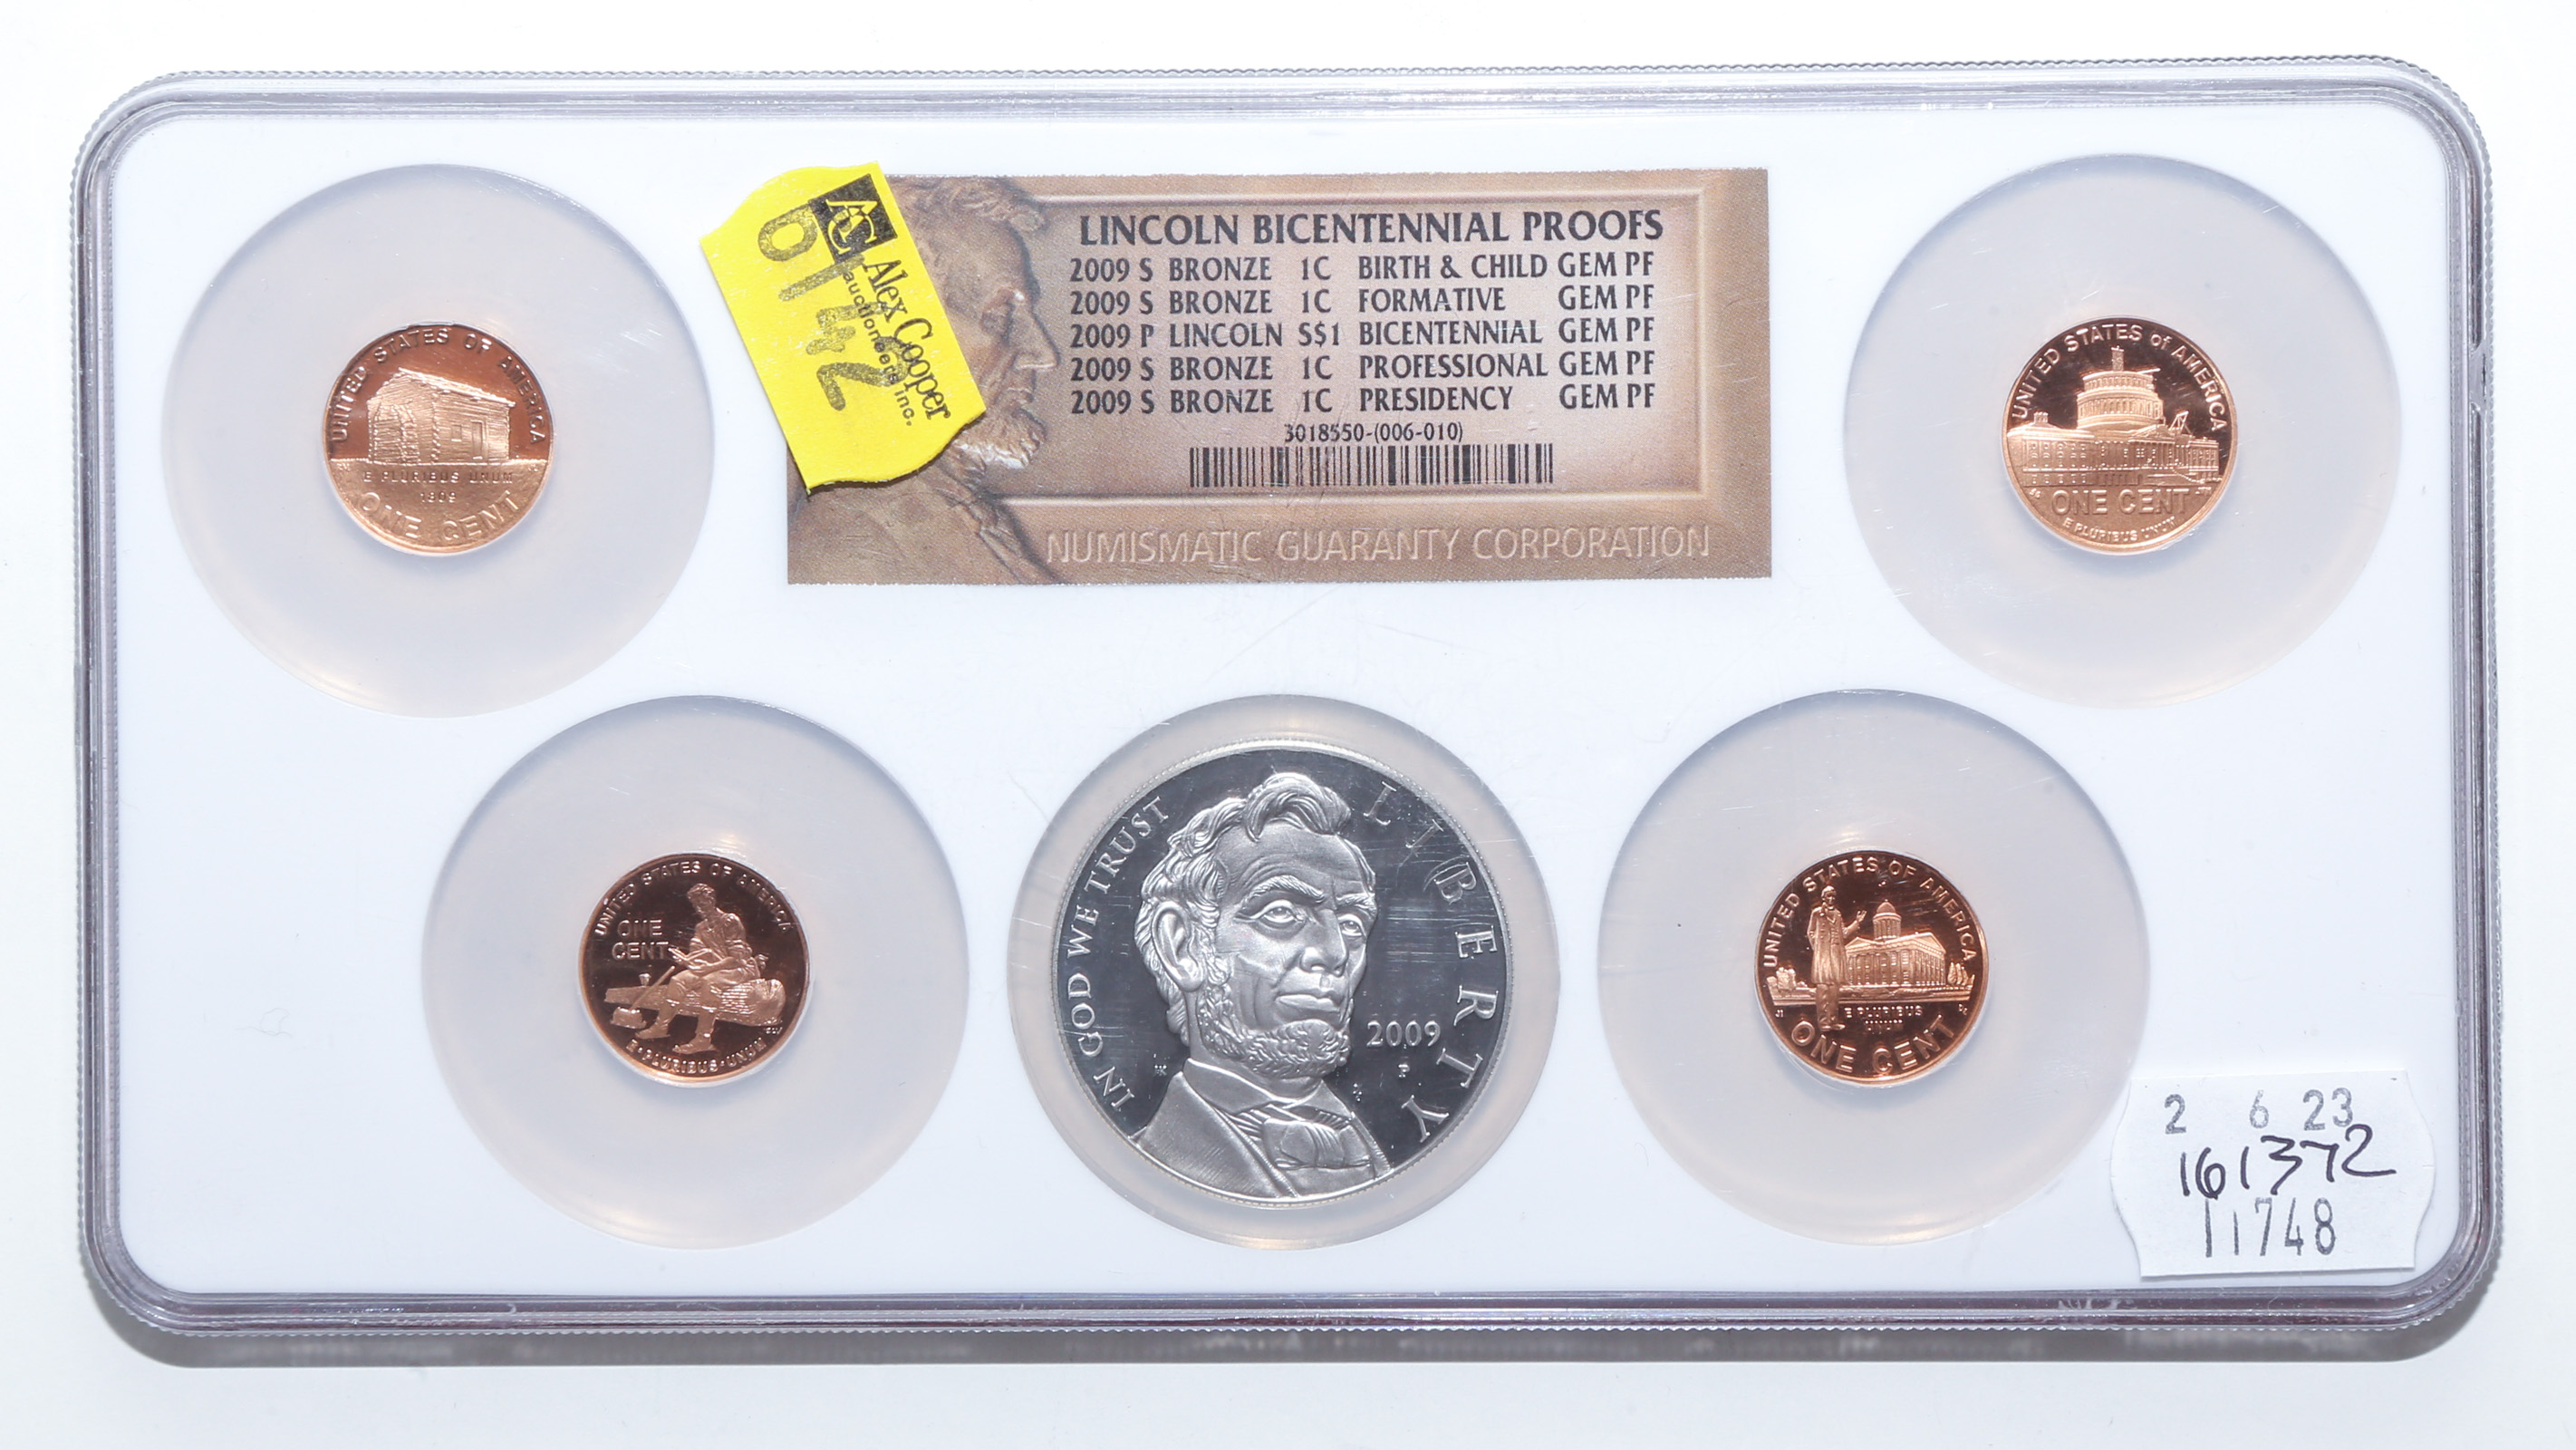 2009 LARGE NGC SLAB WITH LINCOLN 2e9253